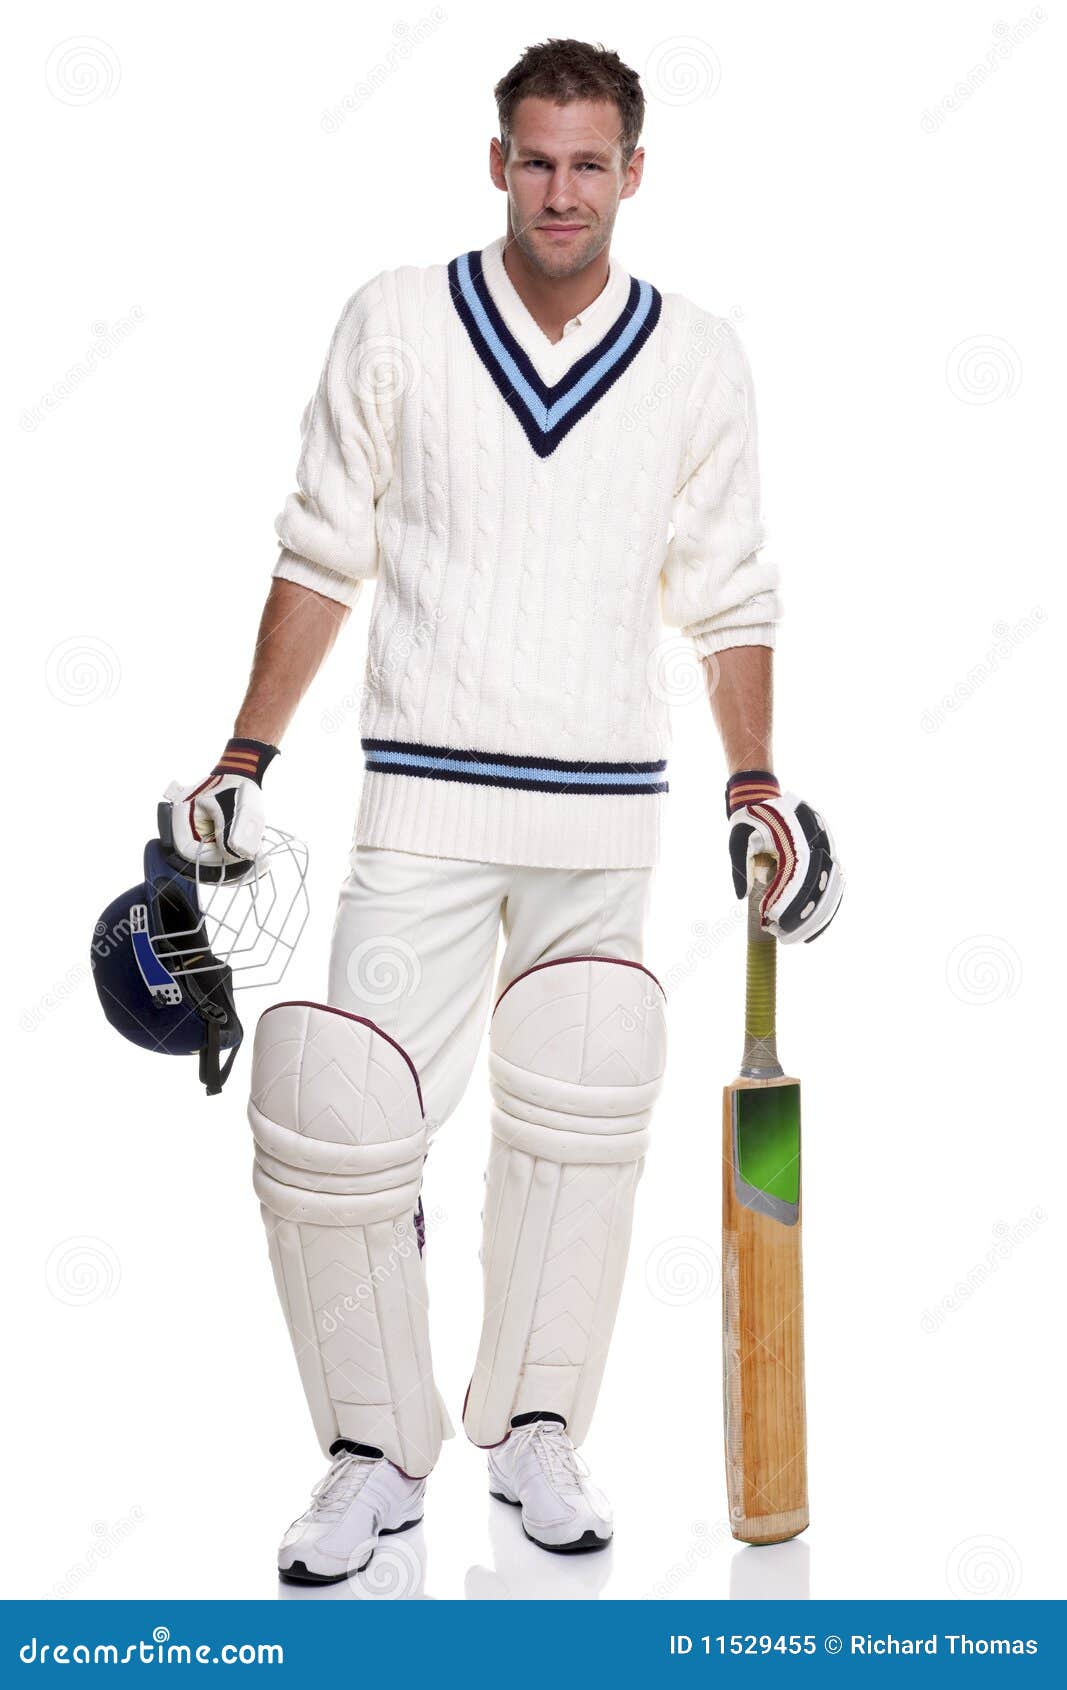 2+ Thousand Cricket Kit Royalty-Free Images, Stock Photos & Pictures